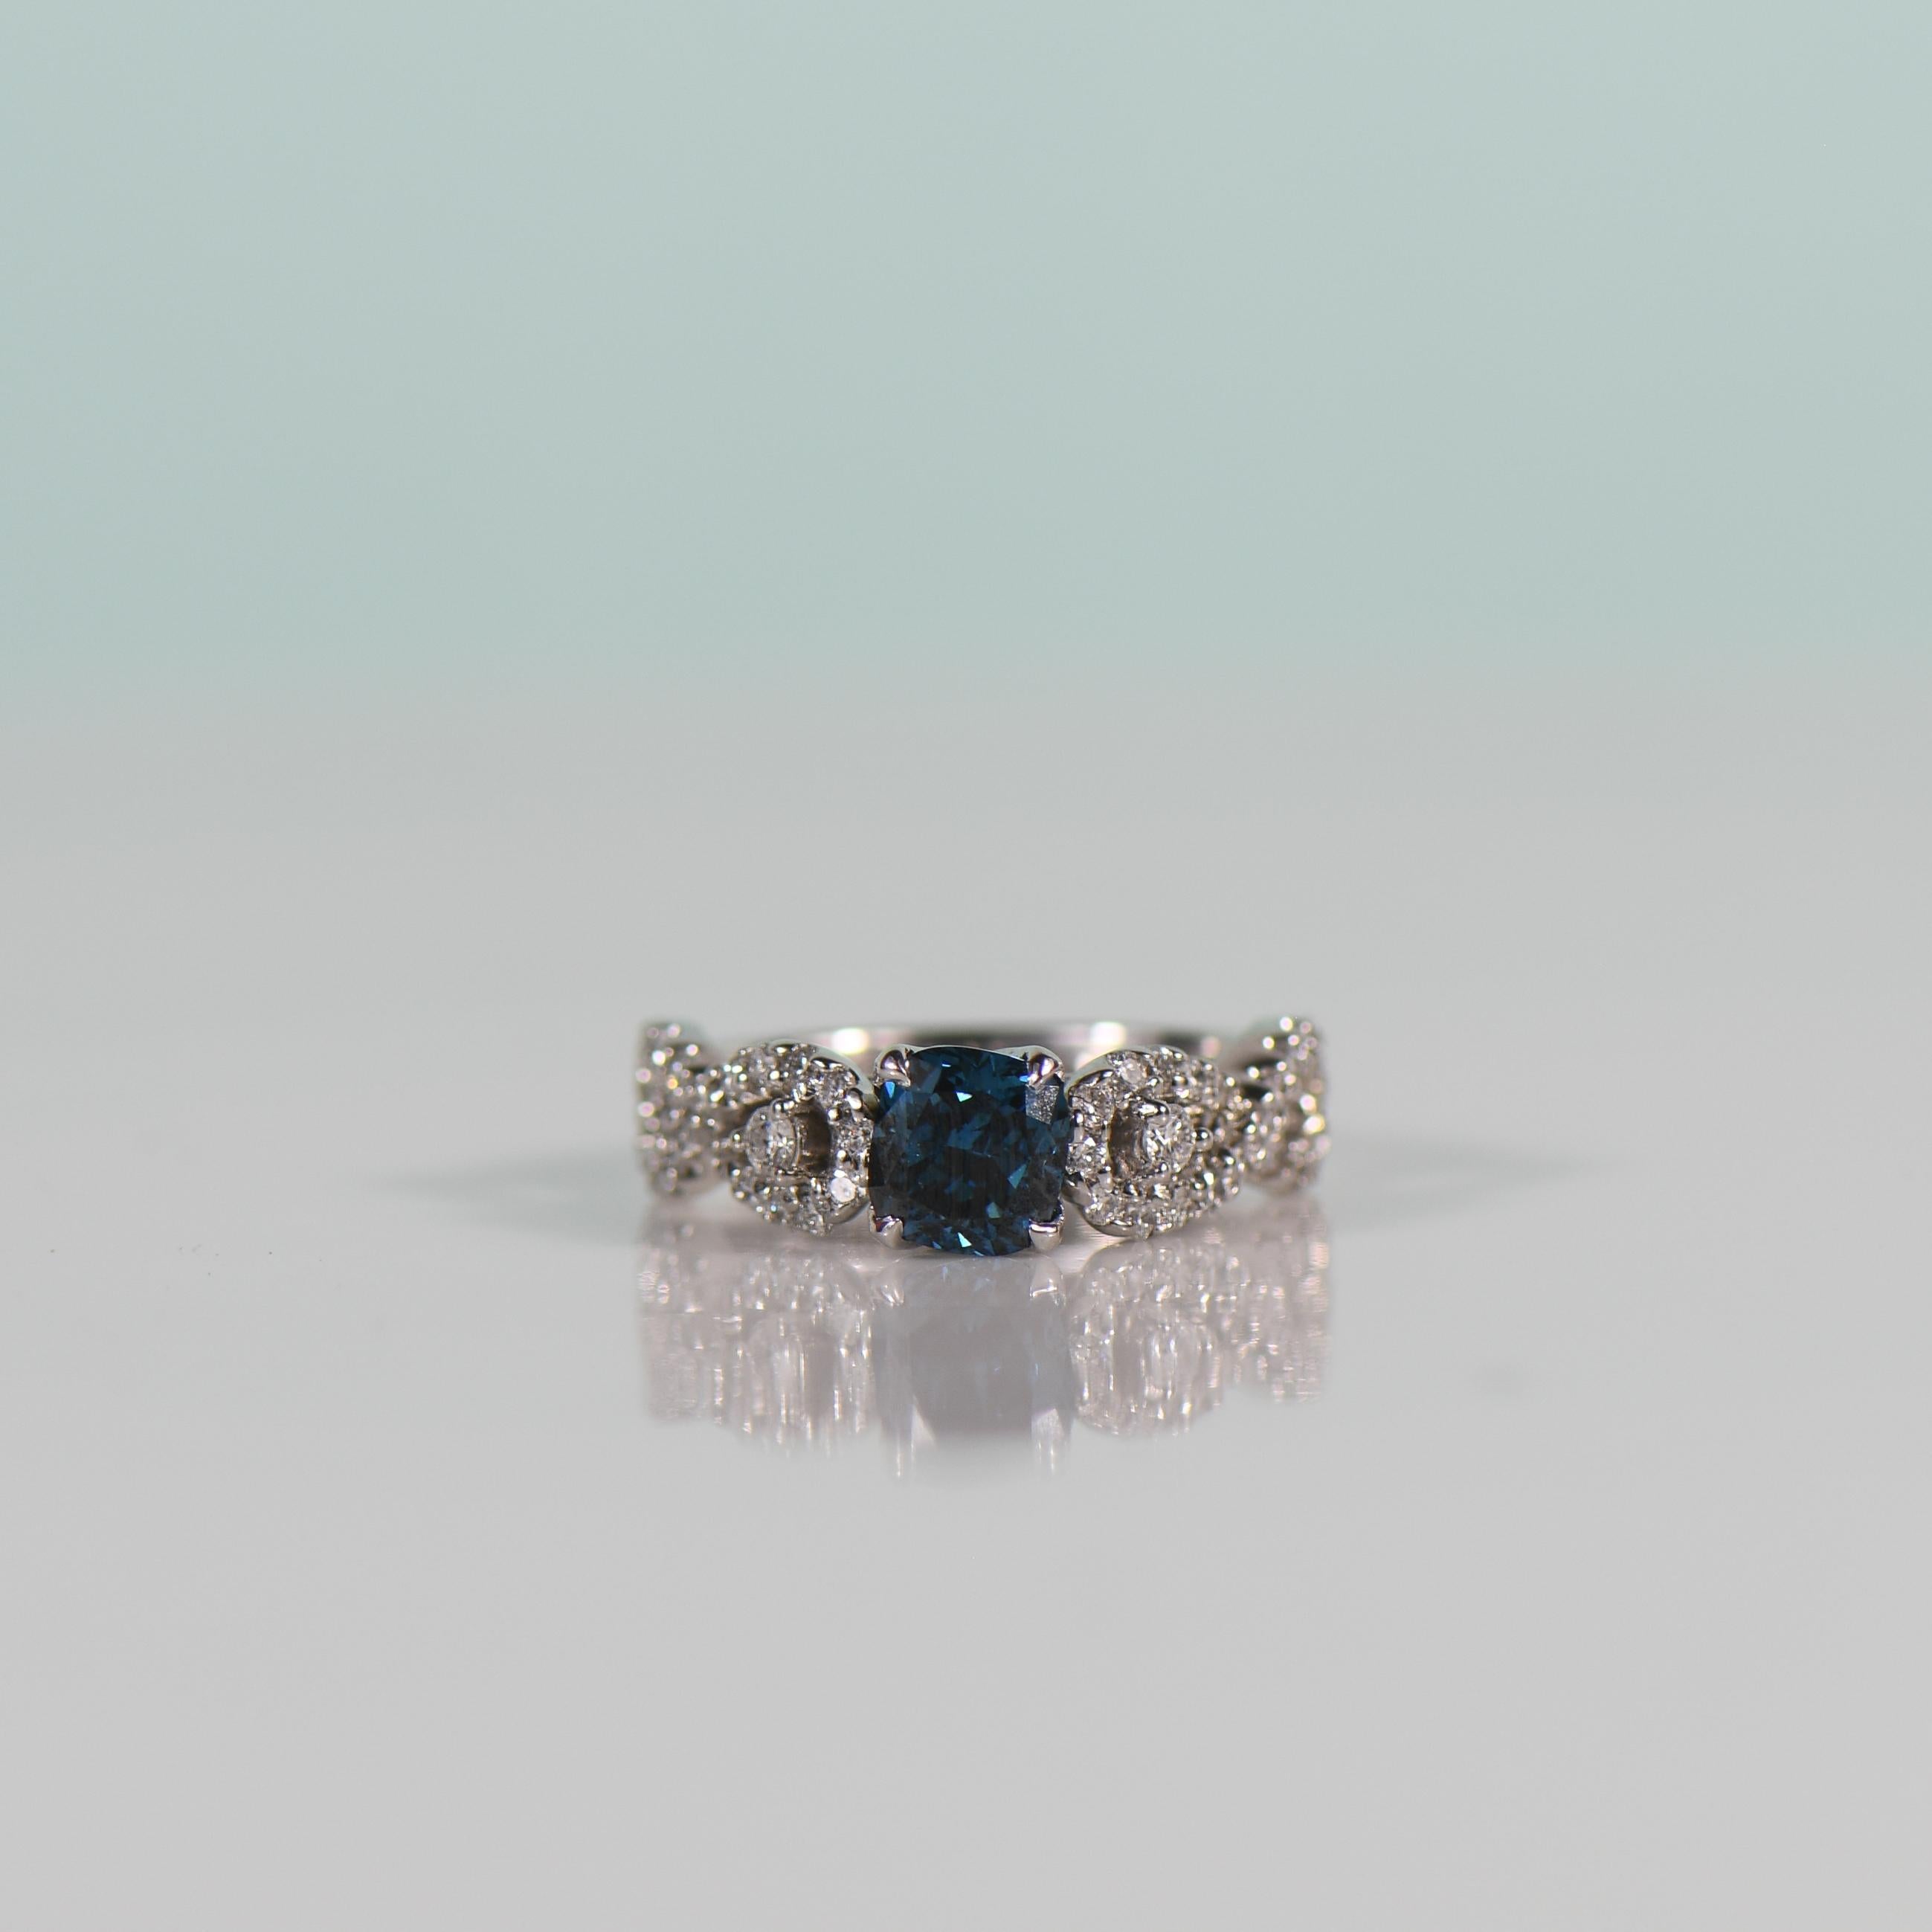 Elevate your love story with this mesmerizing Electric Blue 1.04 carat cushion cut diamond engagement ring, adorned within a stunning diamond infinity band. The vibrant hue of the diamond is reminiscent of deep ocean depths, capturing attention with